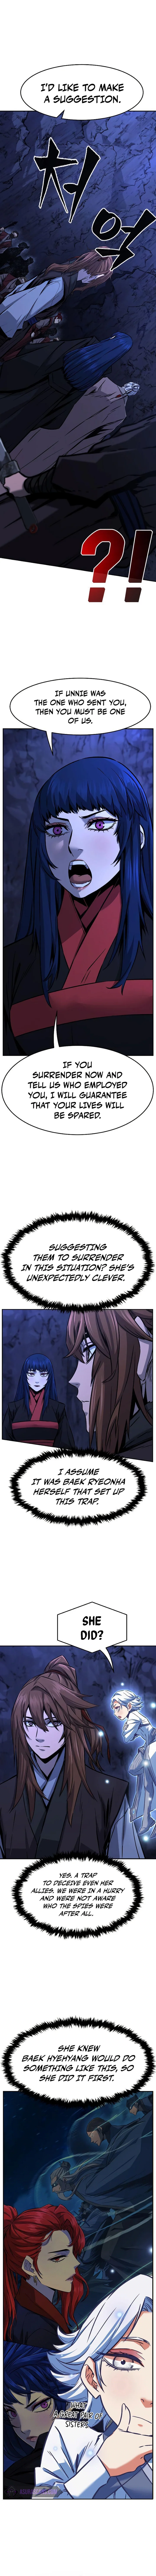 Absolute Sword Sense - Chapter 47 Page 8